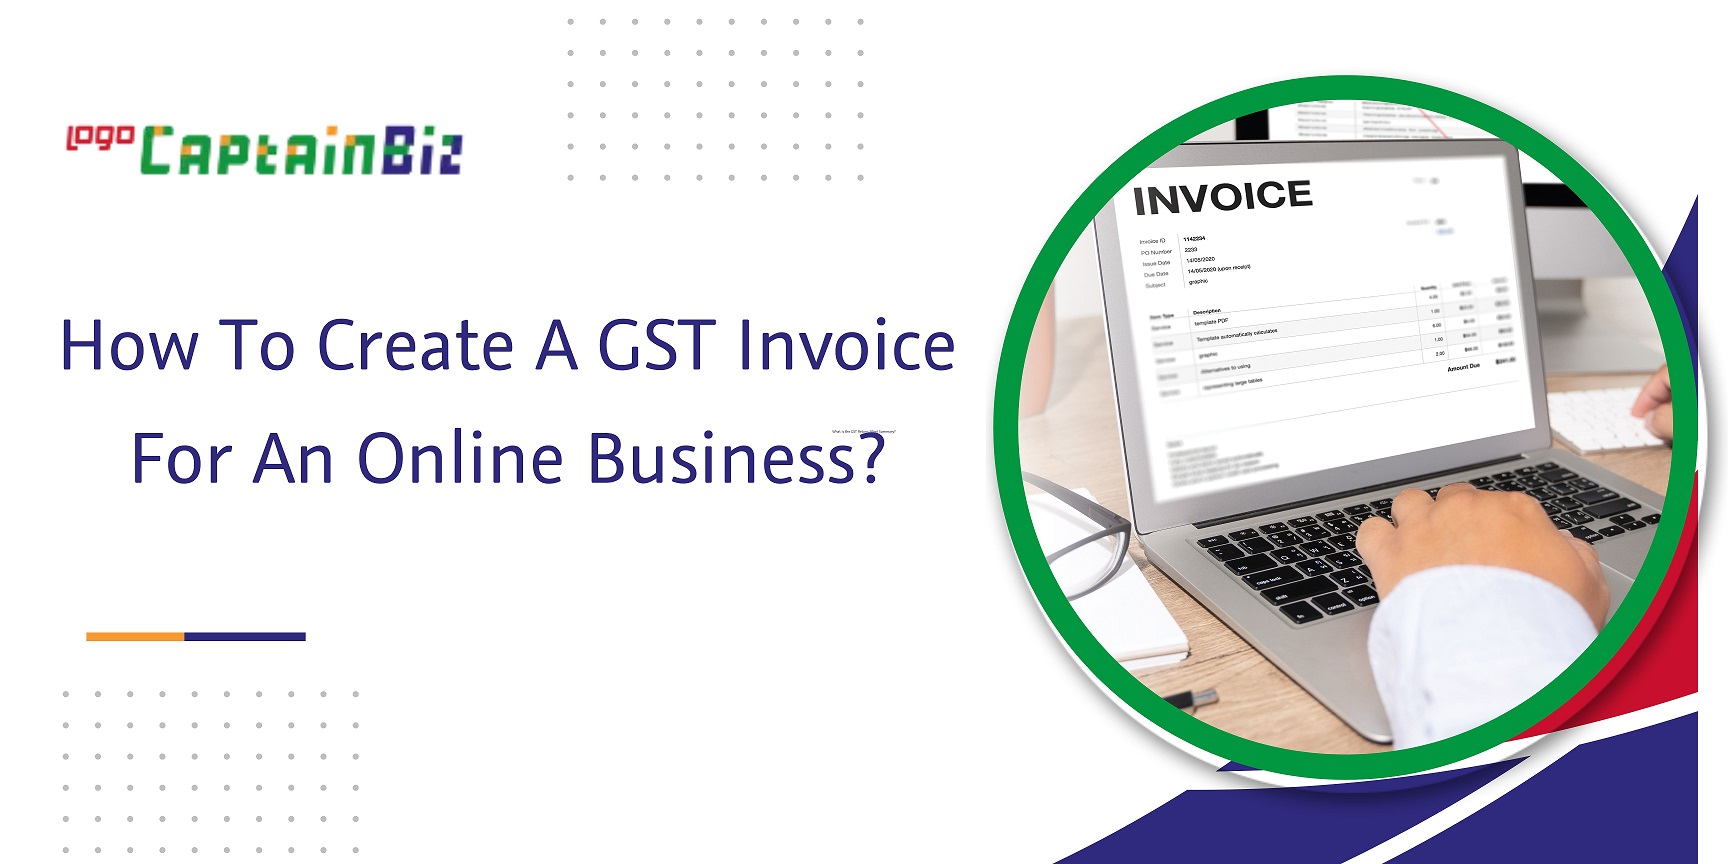 CaptainBiz: how to create a gst invoice for an online business